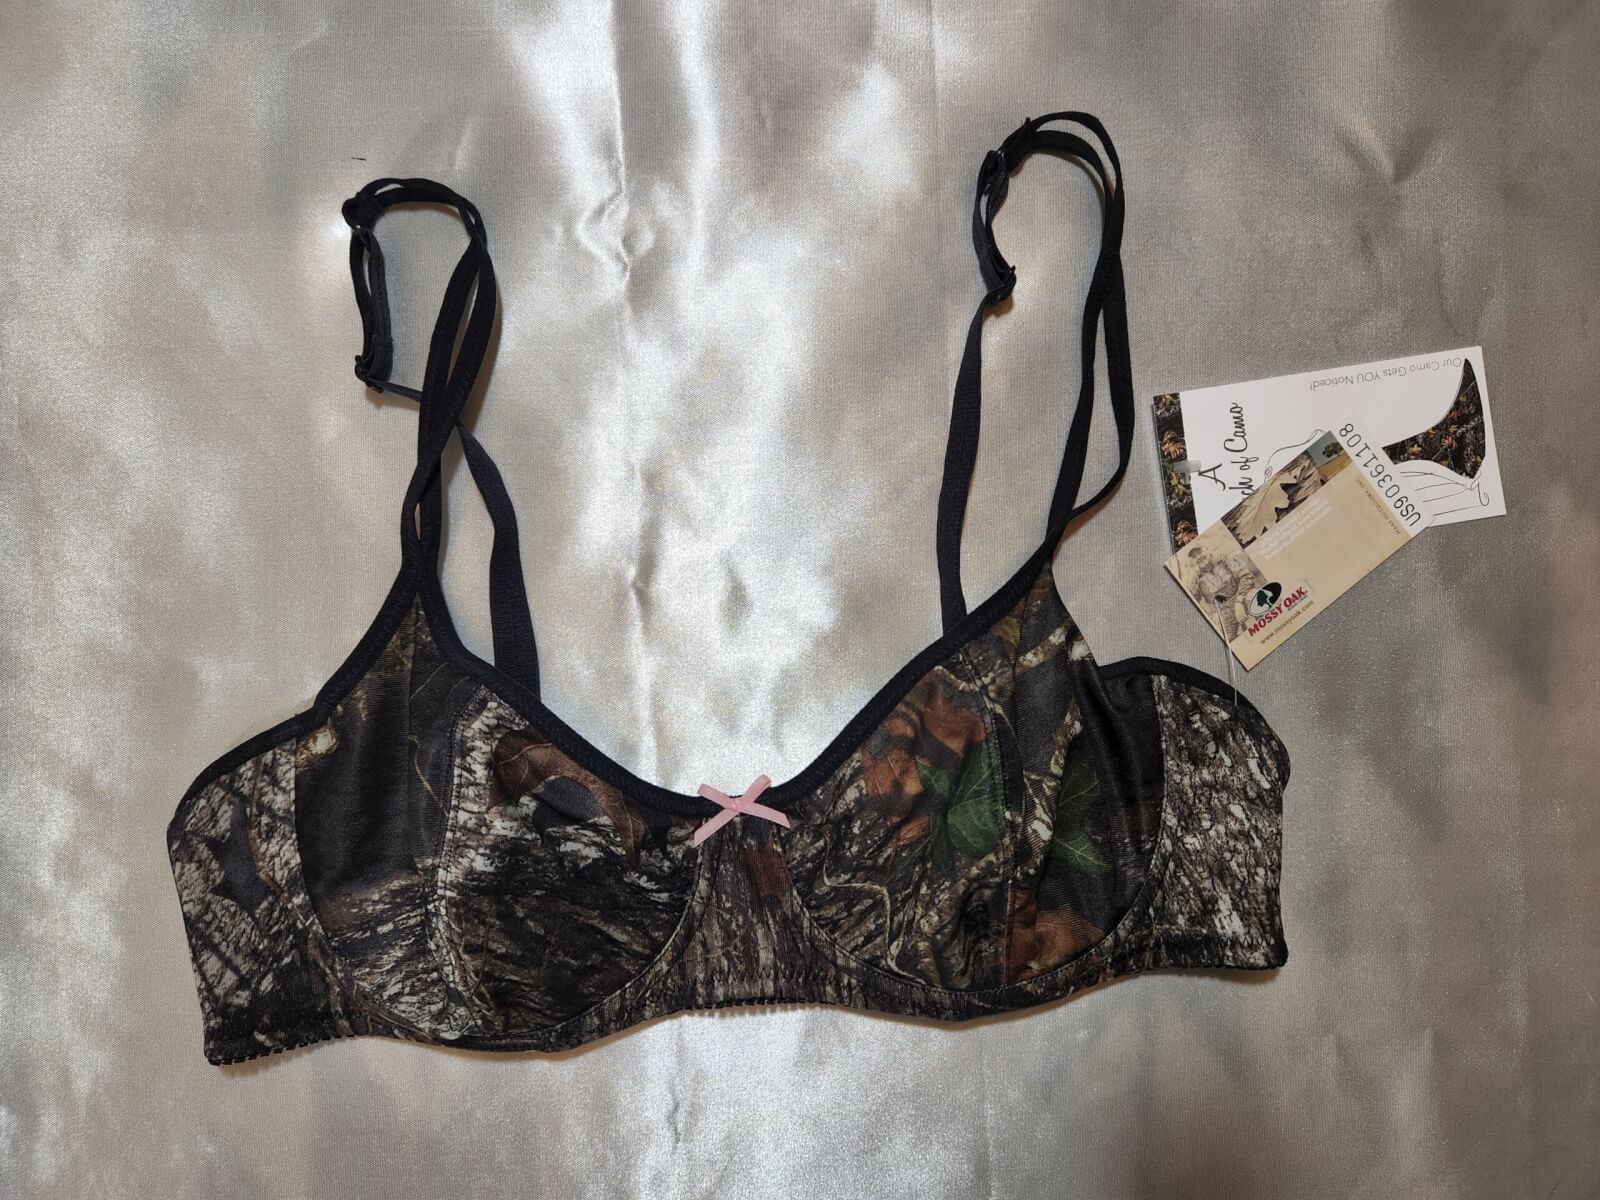 camouflage bra and panty set